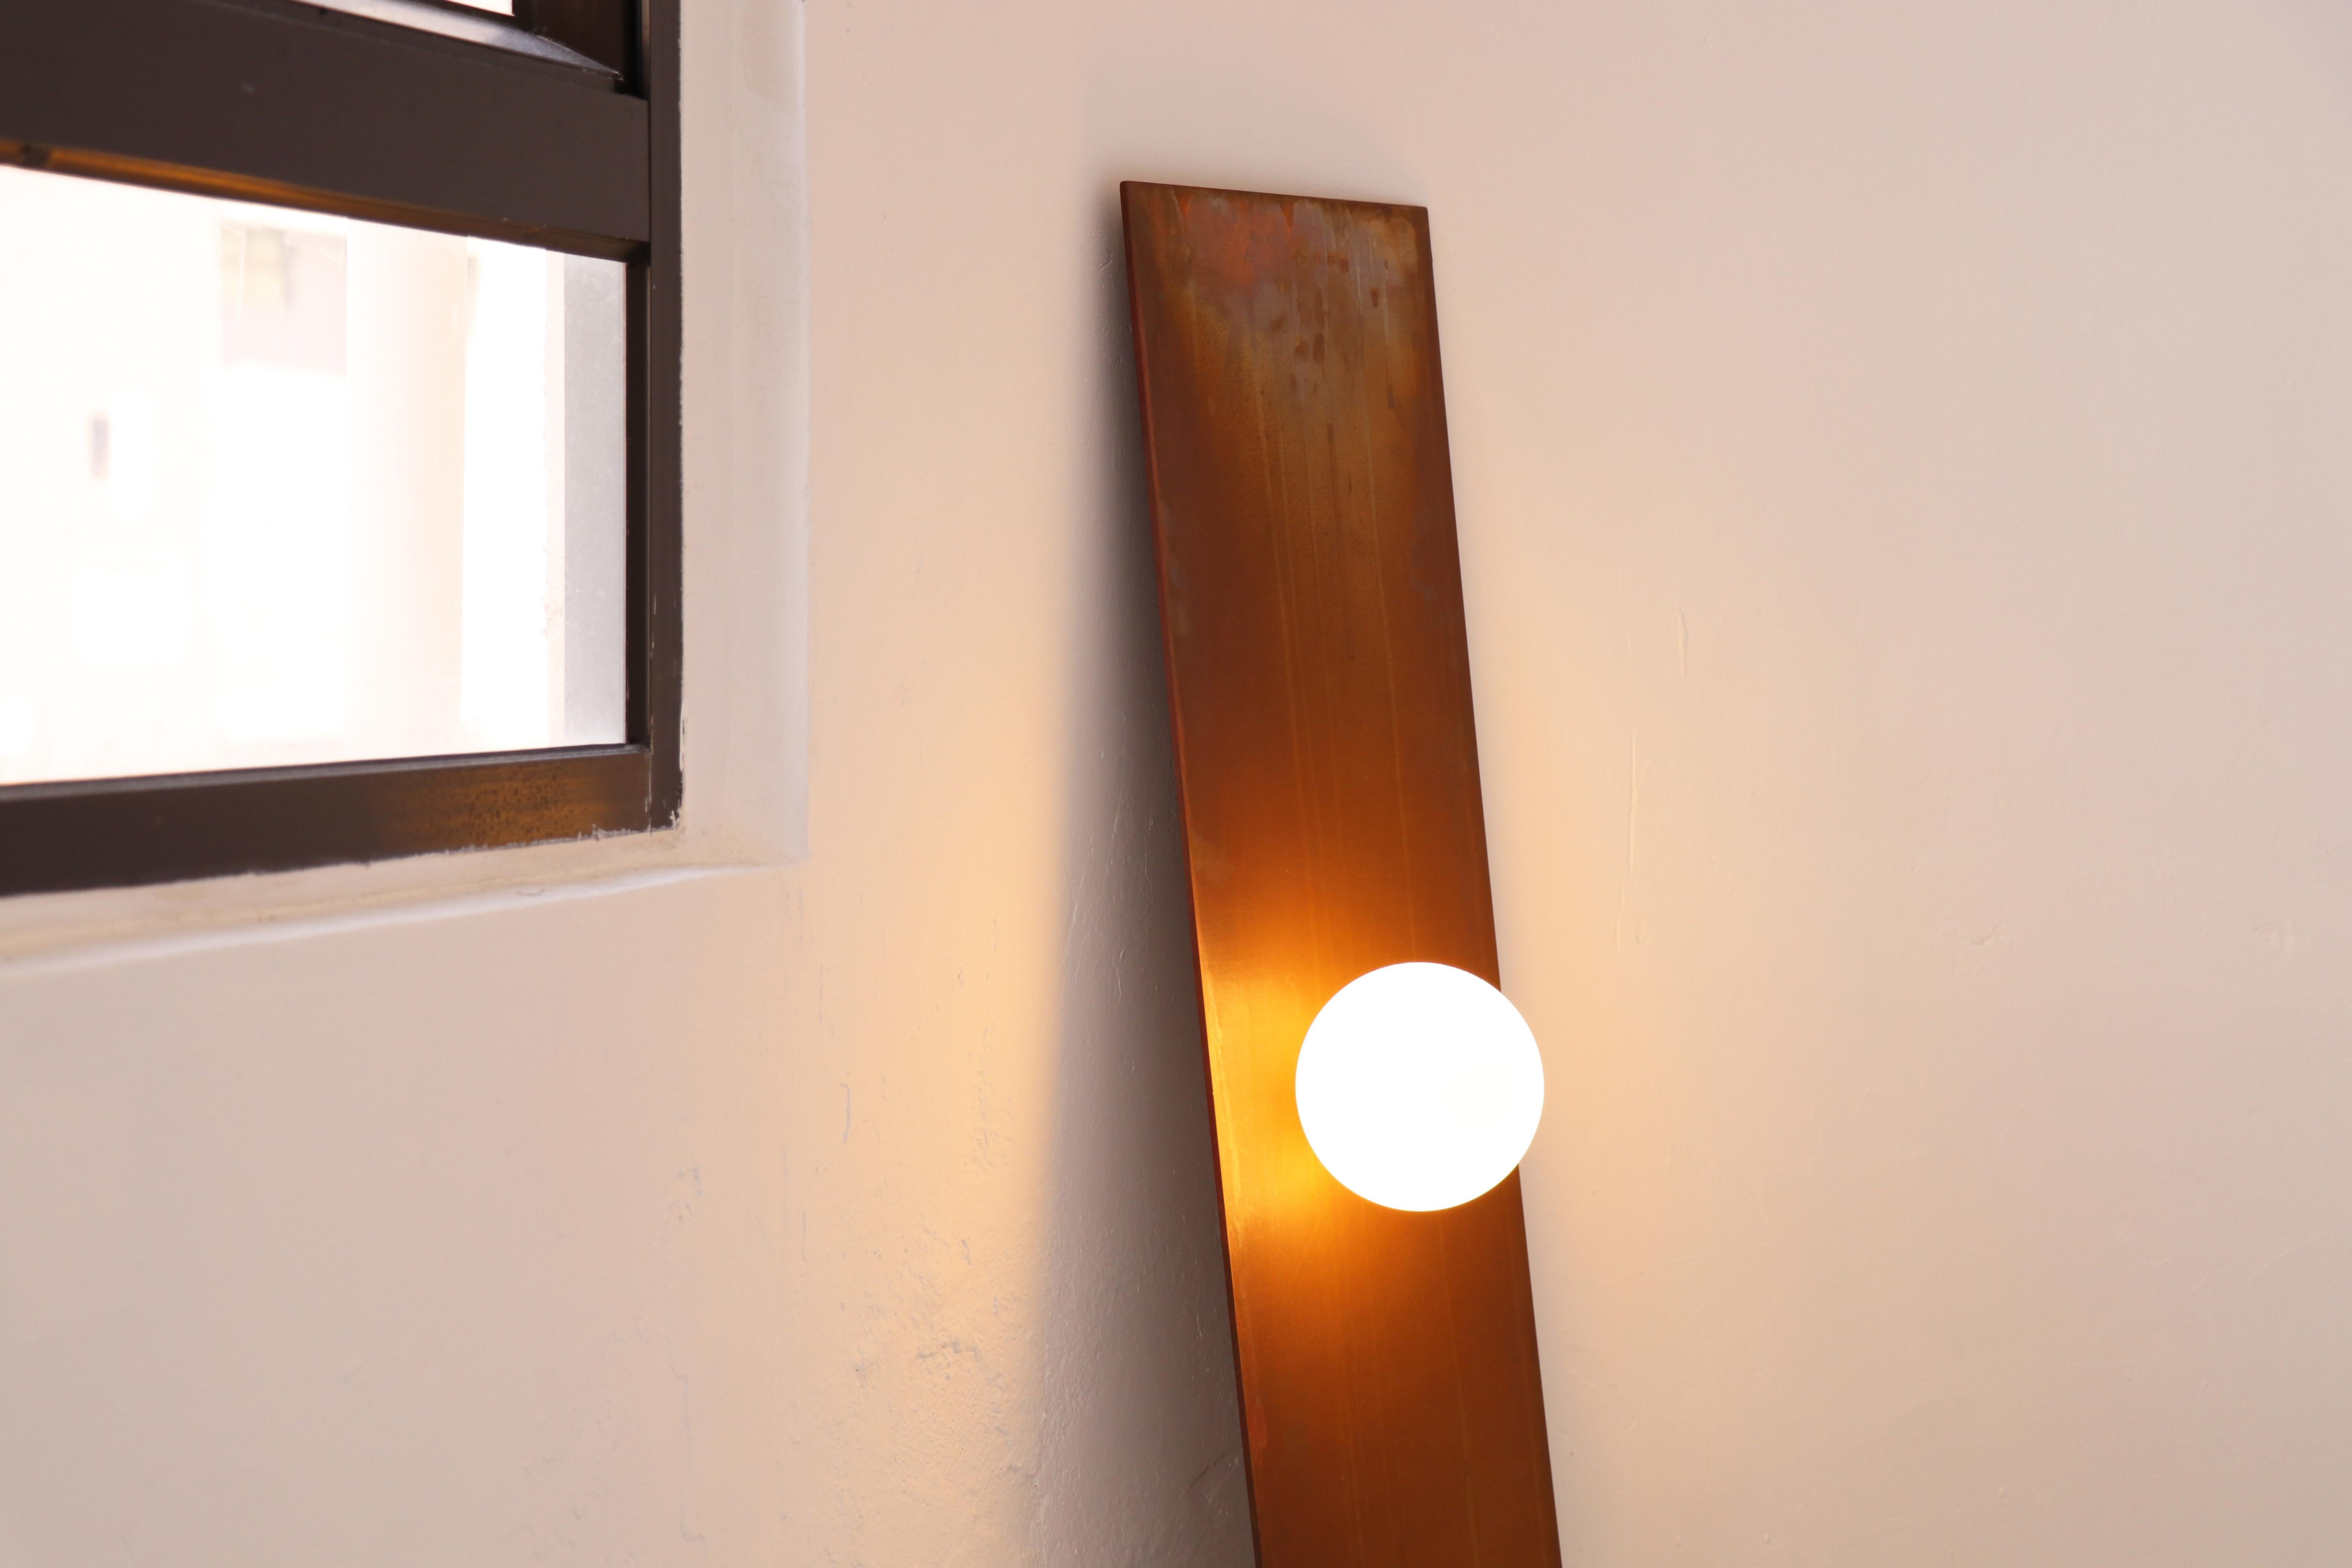 Hong Kong Wall Leaning Light by Batten and Kamp For Sale